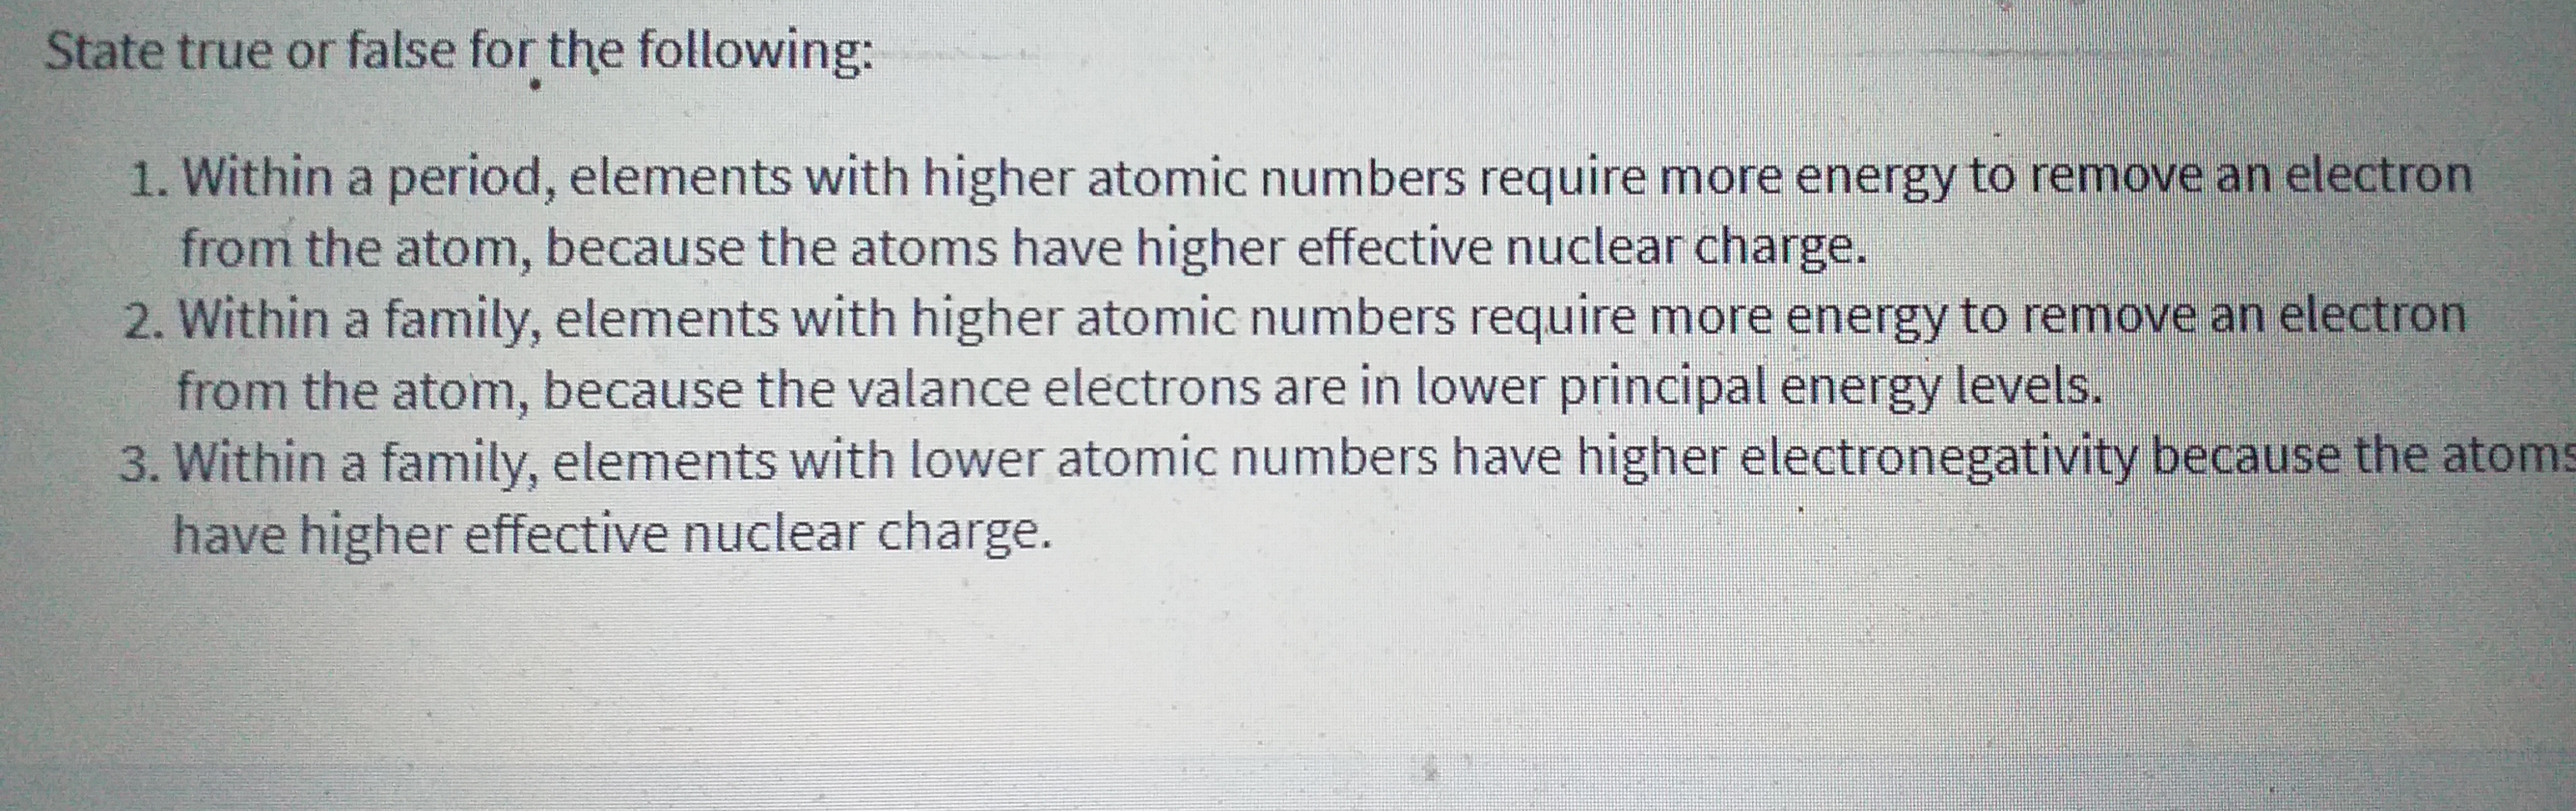 State true or false for the following:
1. Within a period, elements with higher atomic numbers require more energy to remove an electron
from the atom, because the atoms have higher effective nuclear charge.
2. Within a family, elements with higher atomic numbers require more energy to remove an electron
from the atom, because the valance electrons are in lower principal energy levels.
3. Within a family, elements with lower atomic numbers have higher electronegativity because the atoms
have higher effective nuclear charge.
